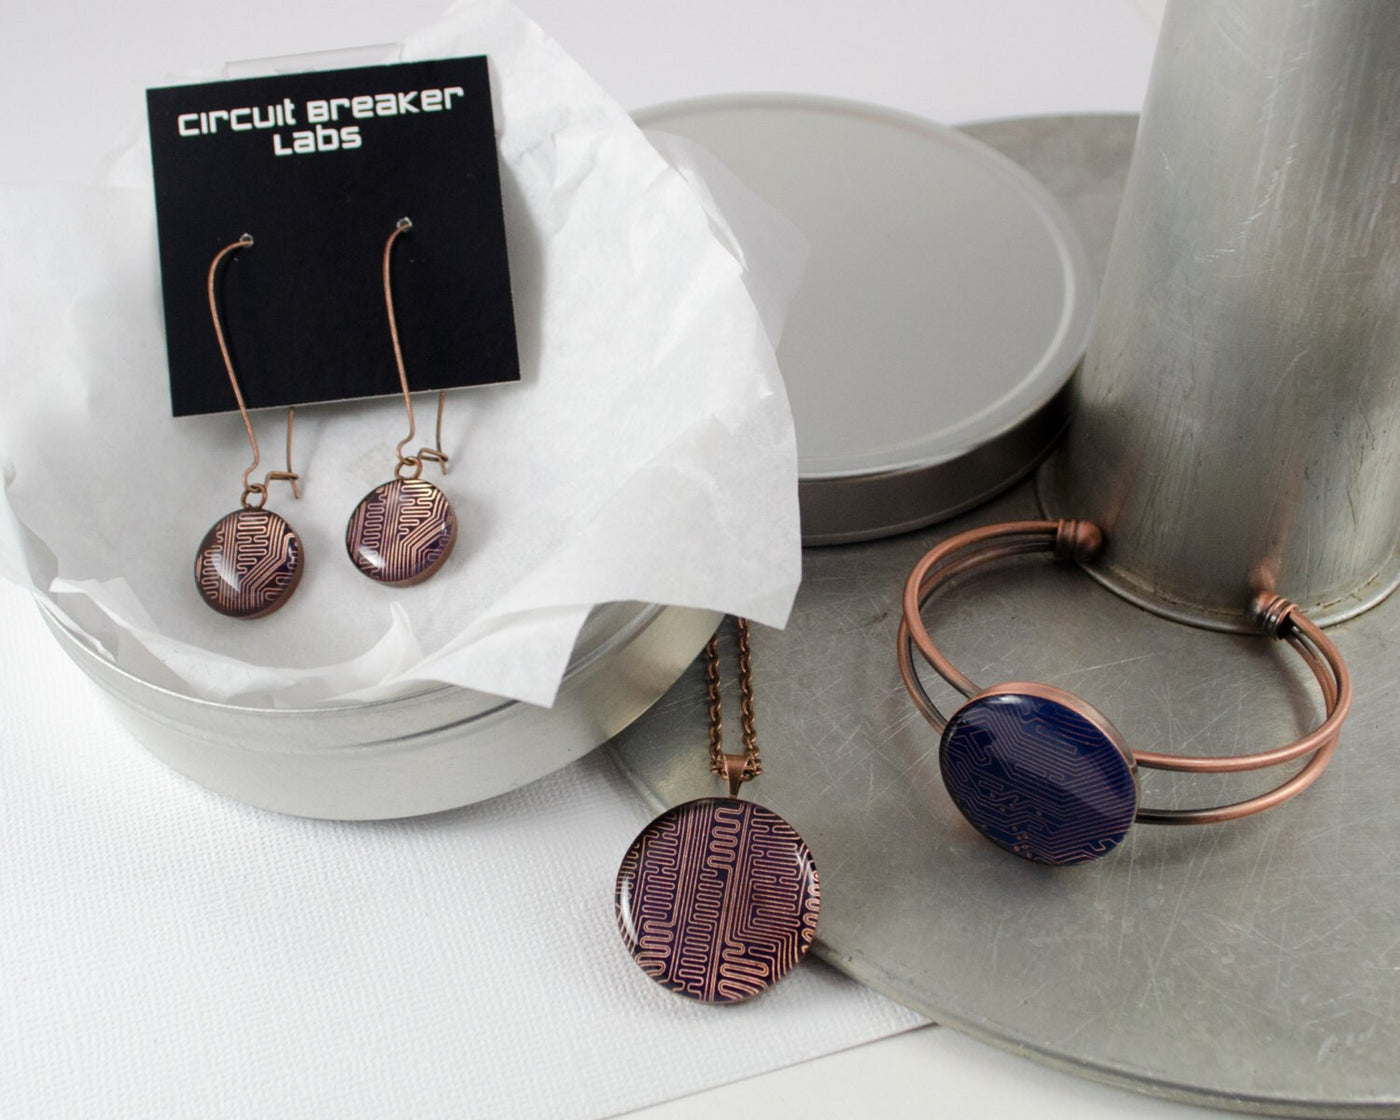 Circuit Board Gift Set, Copper Computer Necklace, Copper Bangle Bracelet, Copper Dangle Earrings, Geeky Engineer Gift, Wearable Technology